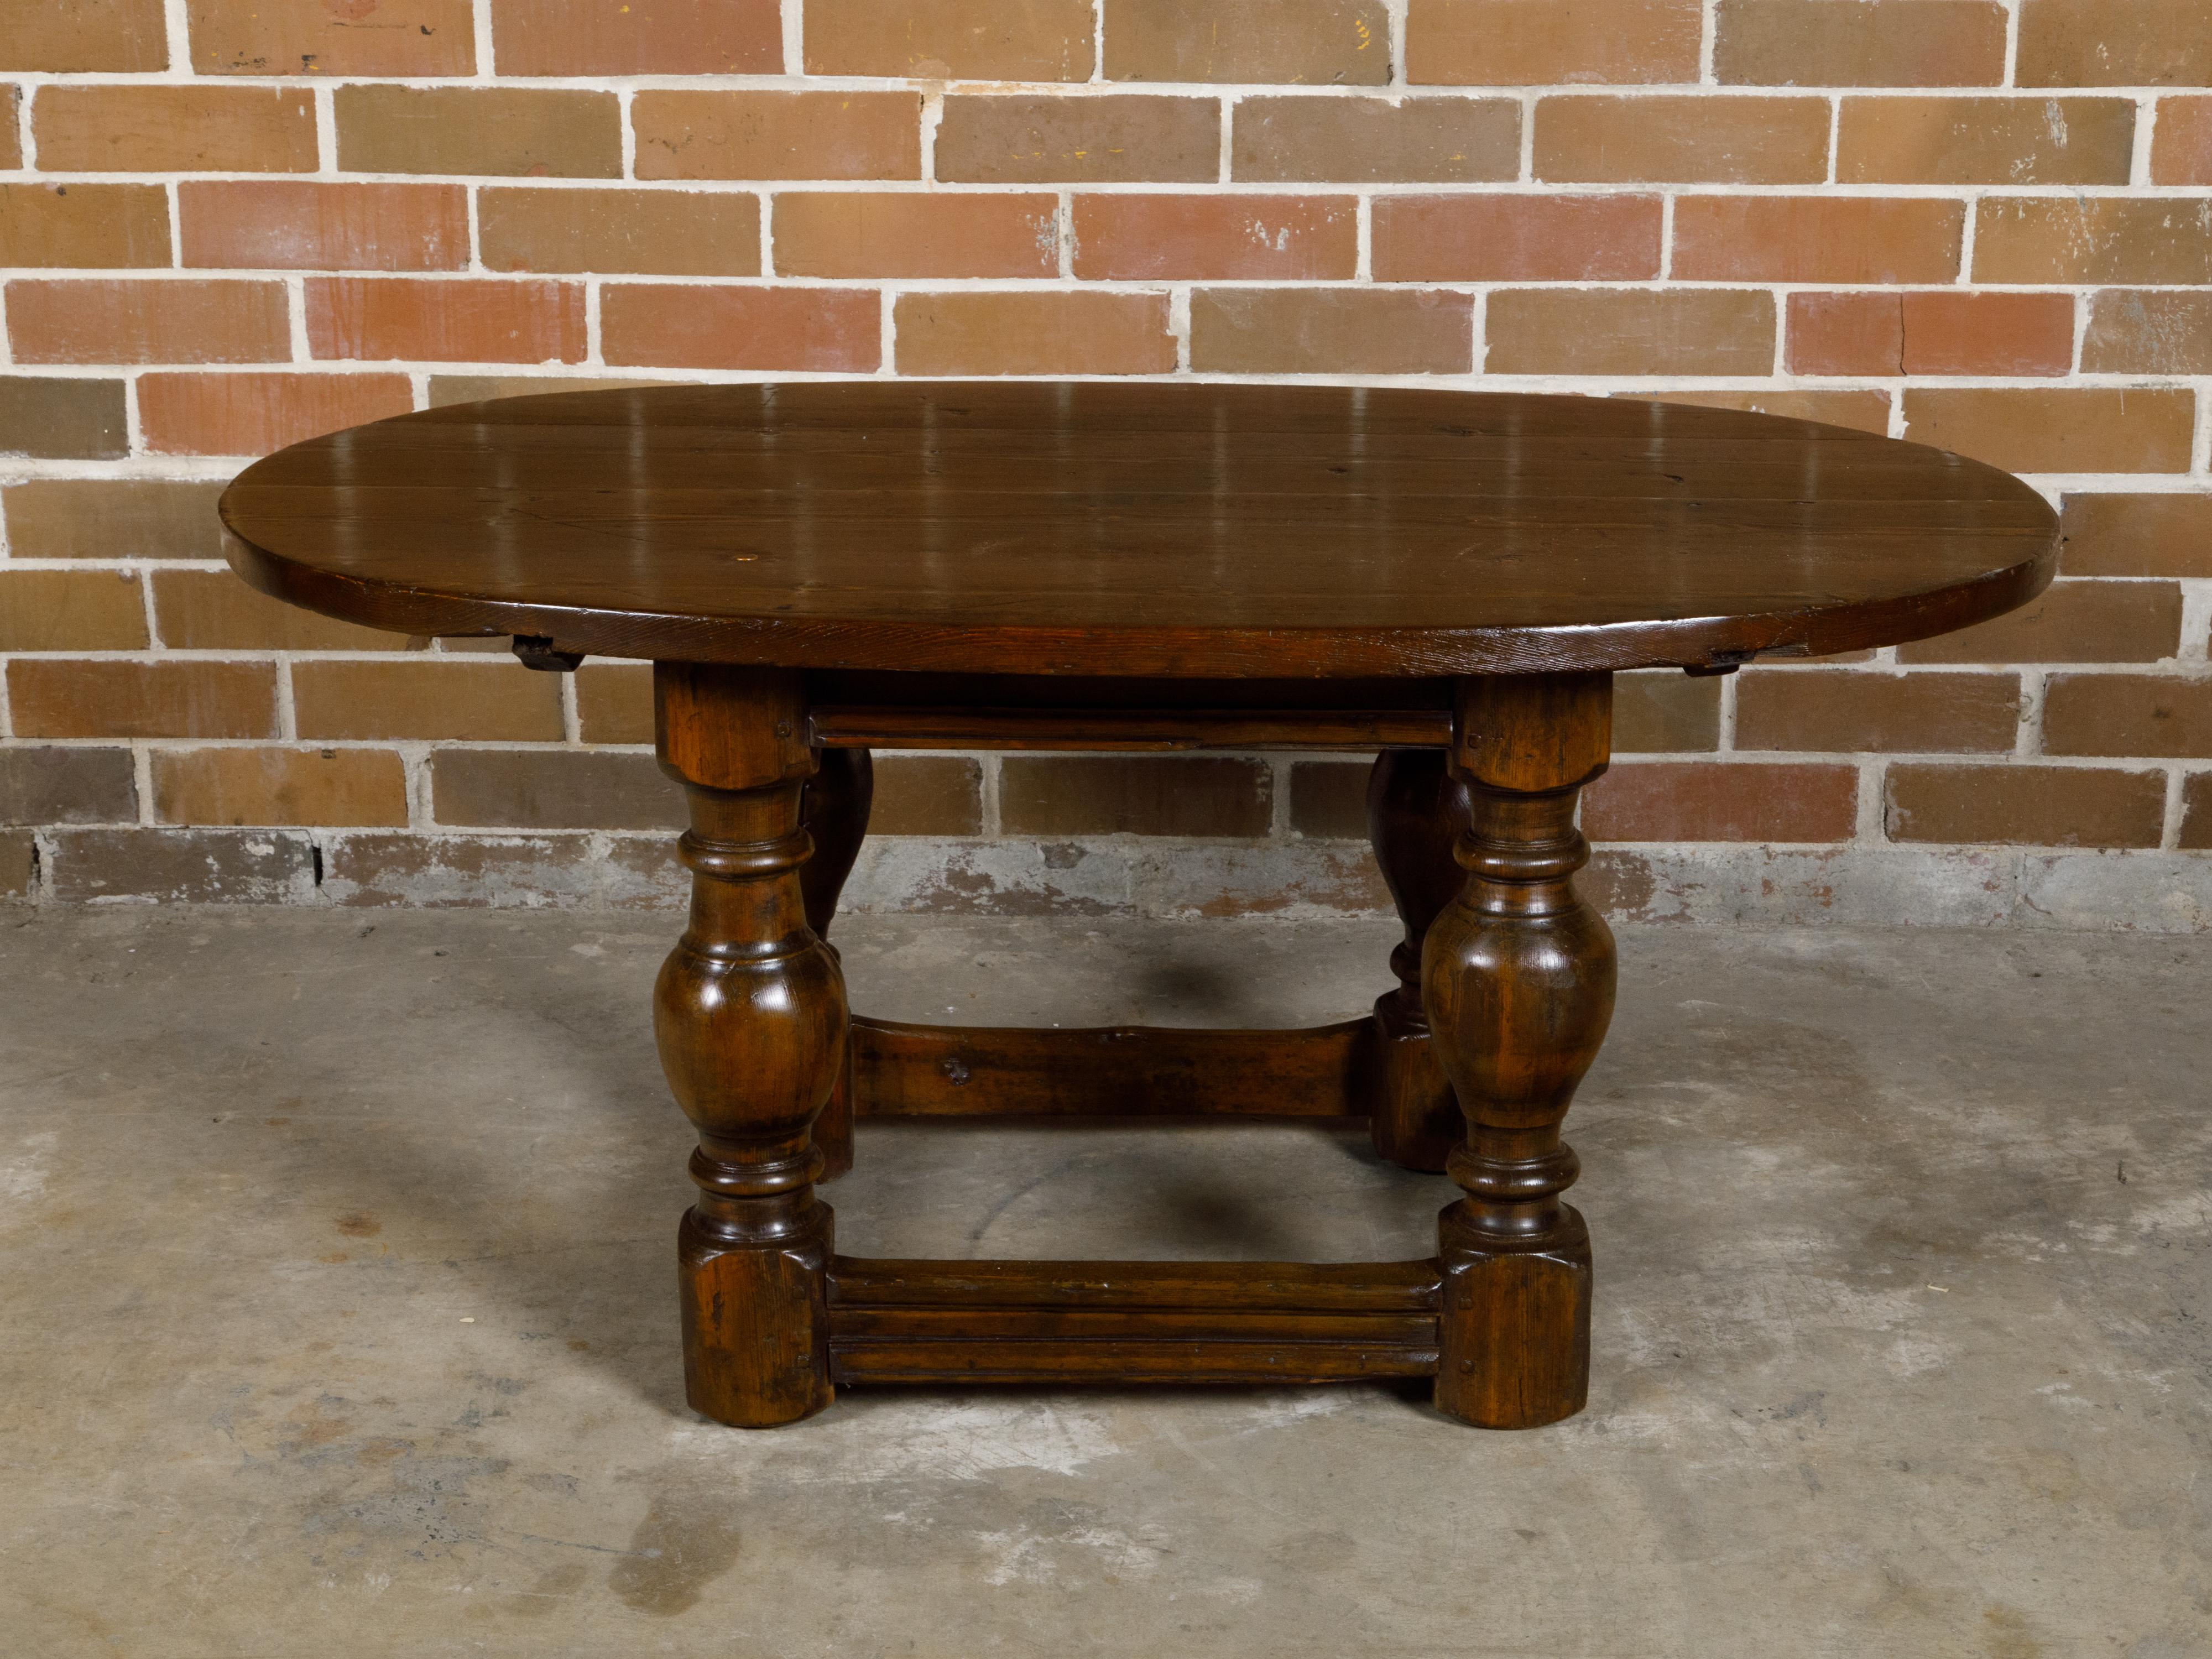 An English Georgian period pine table from the 18th century with oval top, turned legs and side stretchers. This exquisite English Georgian period pine table from the 18th century marries the rustic charm of its material with the refined elegance of